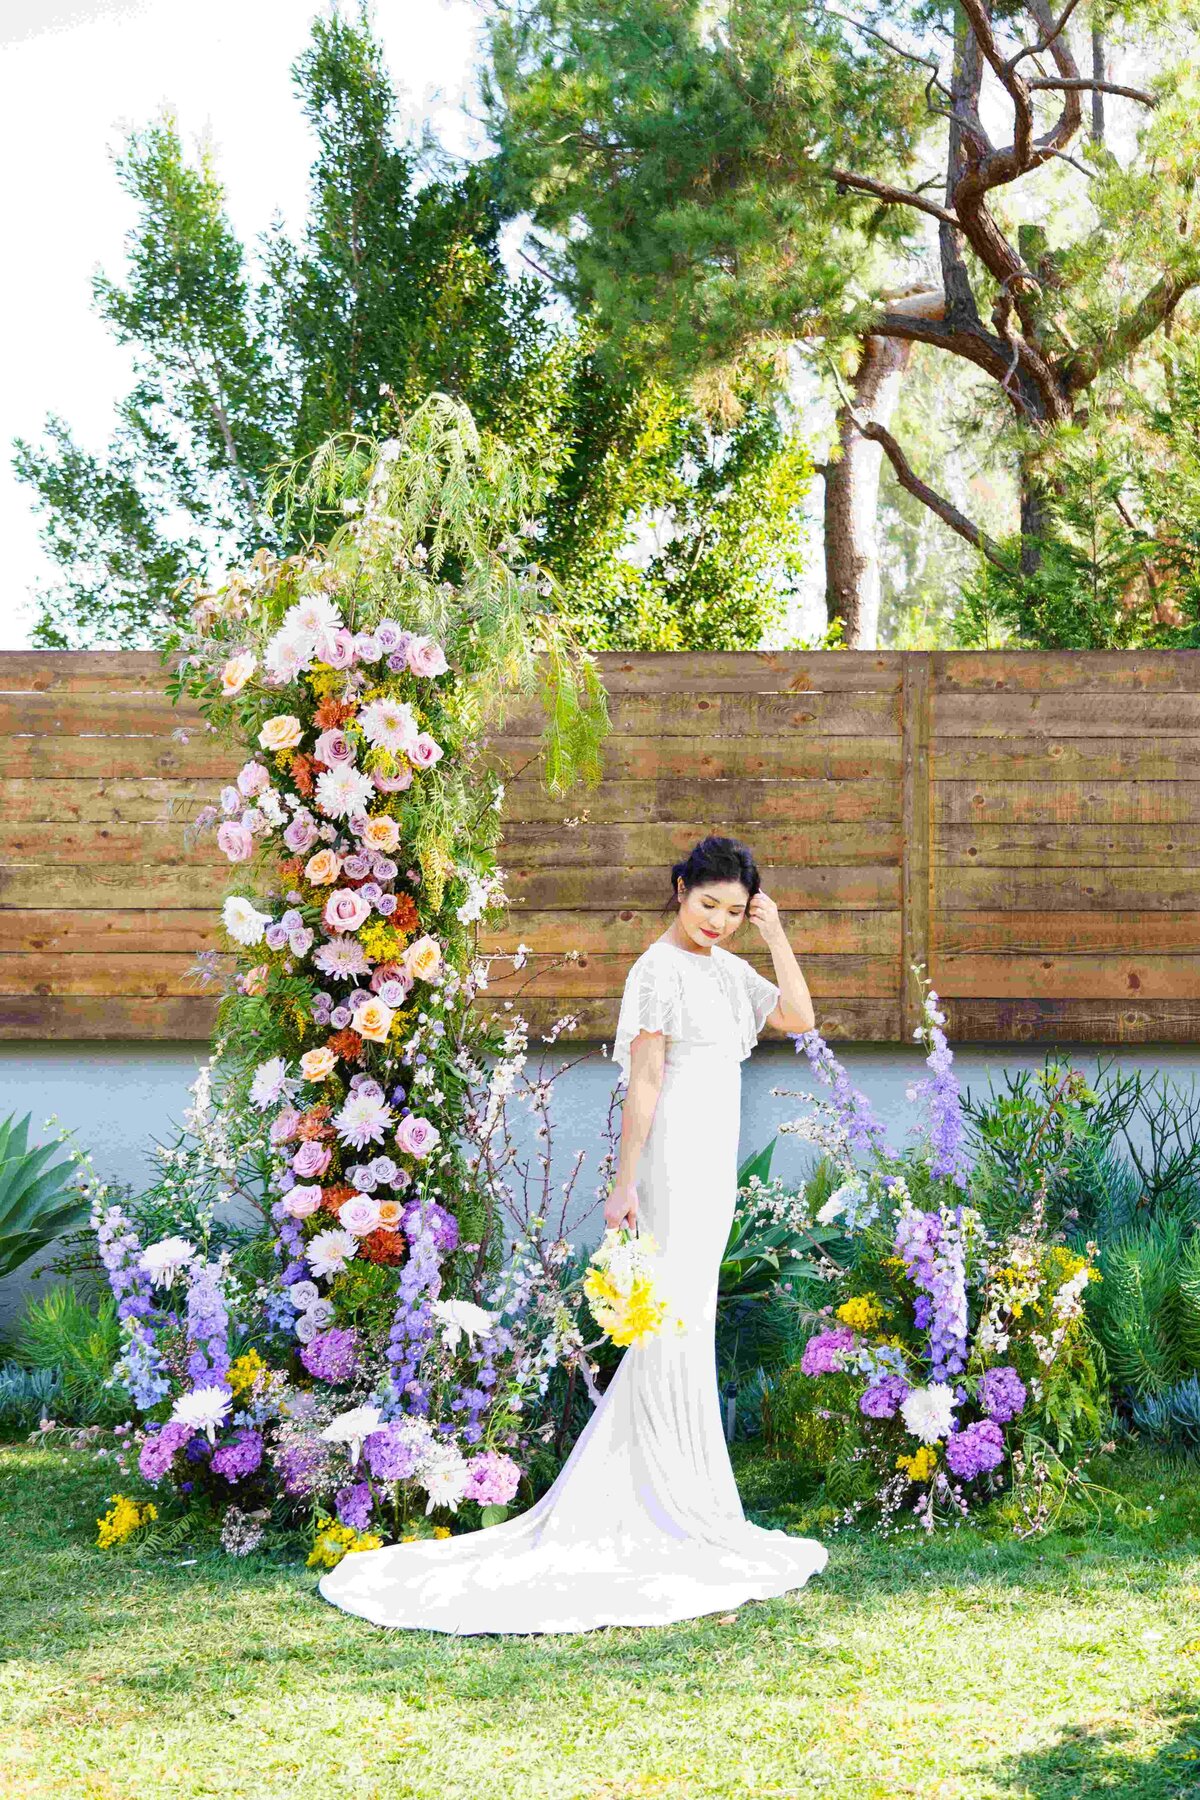 Bride  holding a Spring bouquet standing in between colorful floral pillars